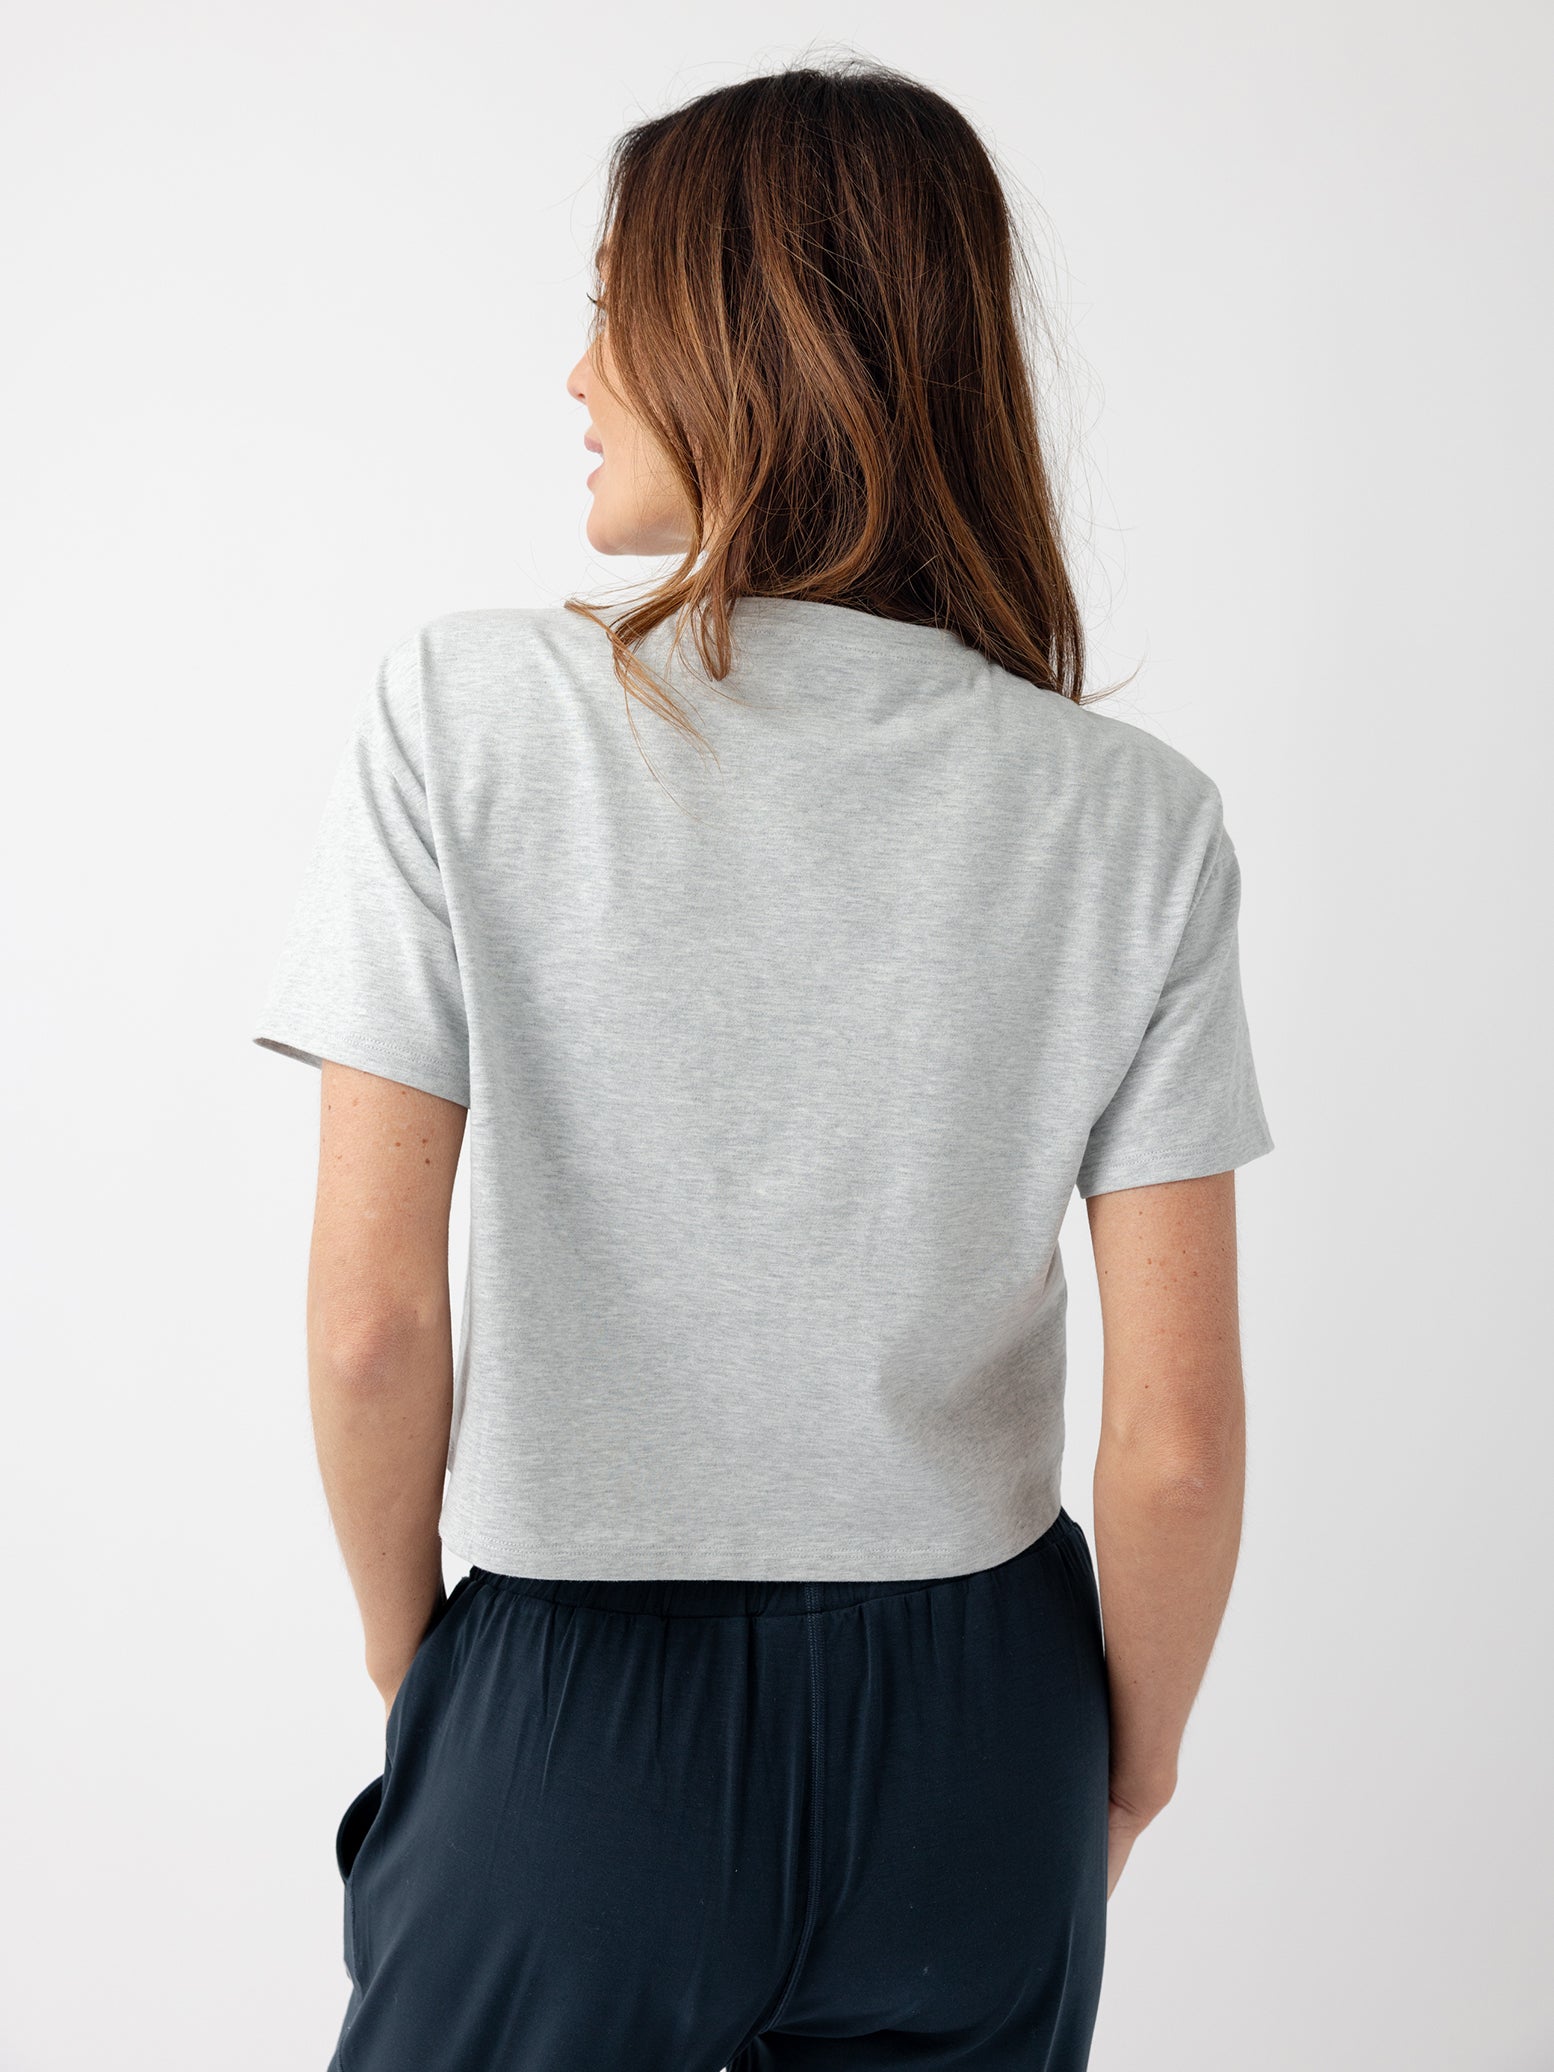 French Dove Heather All Day Cropped Tee. The photo of the All Day Cropped Tee is taken with a with a white background and is worn by a woman. 